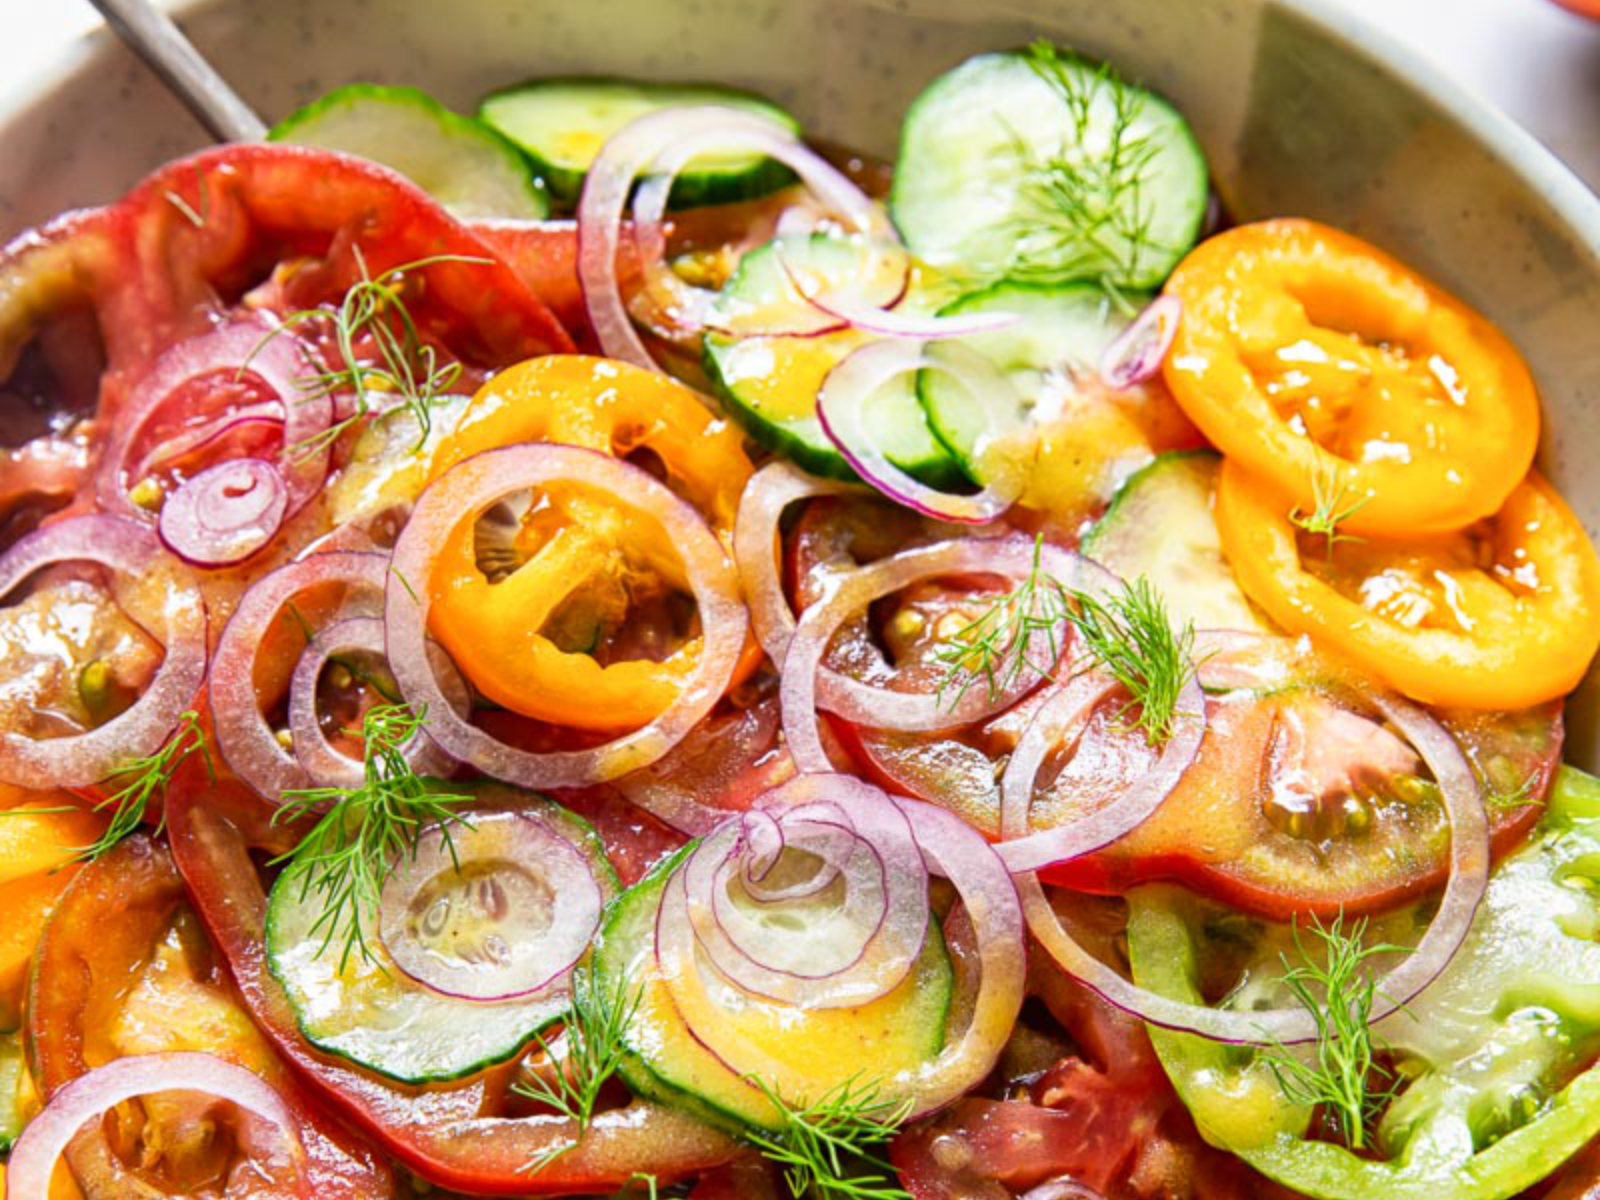 Cucumber and Heirloom Tomato Salad with Red Onions